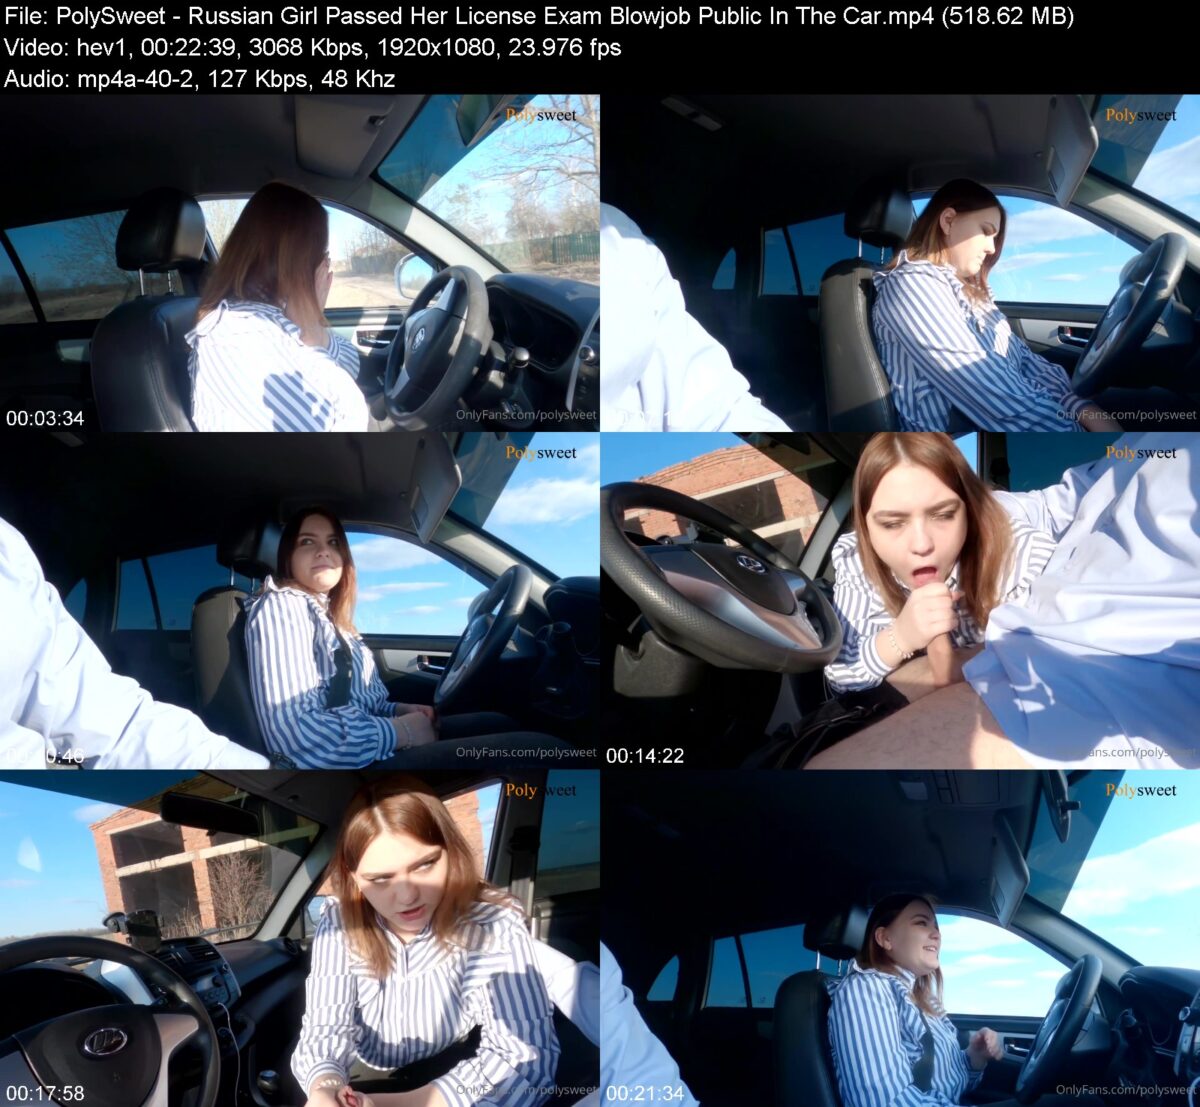 Actress: PolySweet. Title and Studio: Russian Girl Passed Her License Exam Blowjob Public In The Car